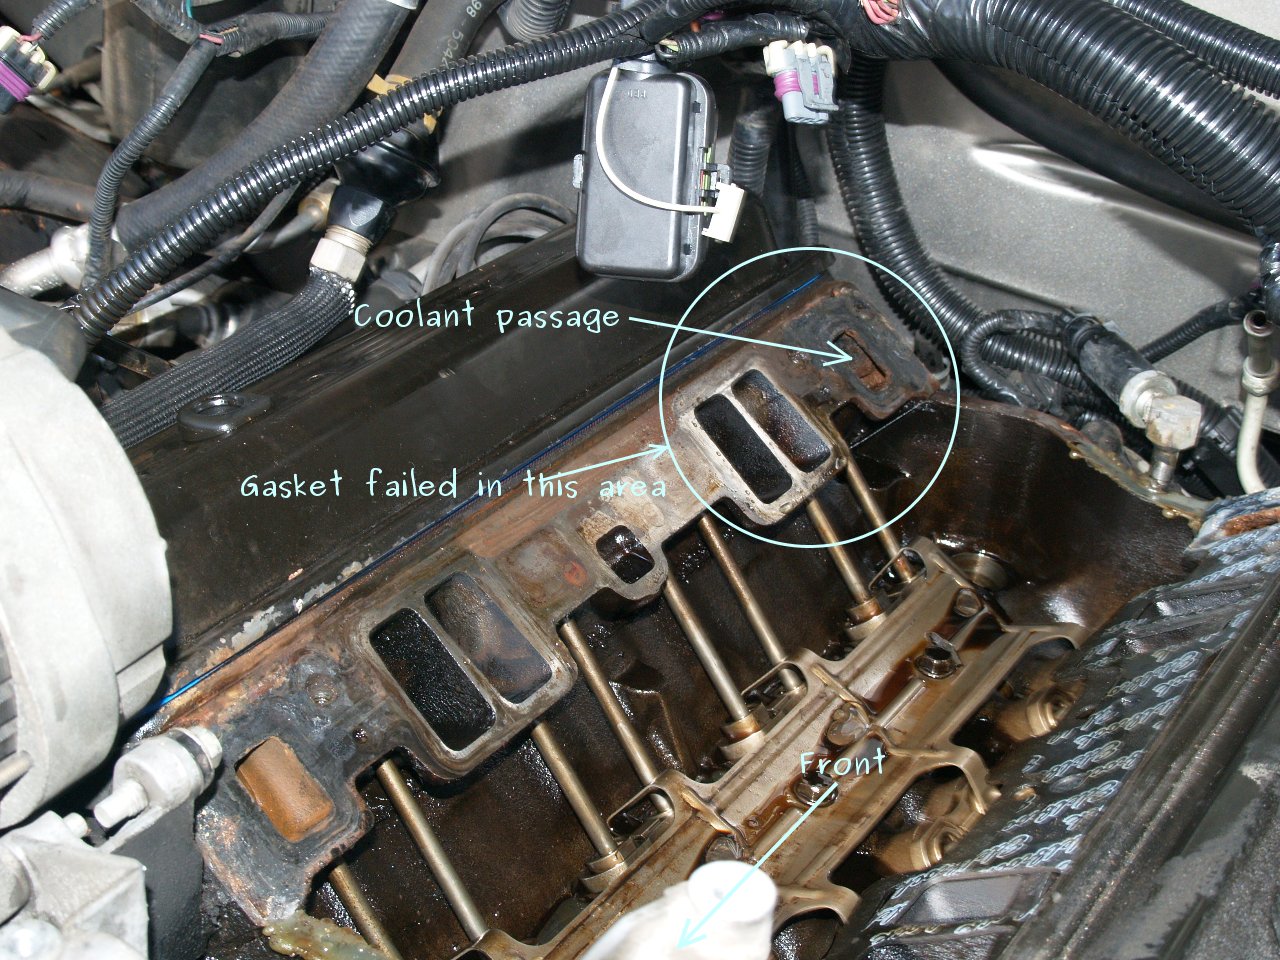 See P0415 in engine